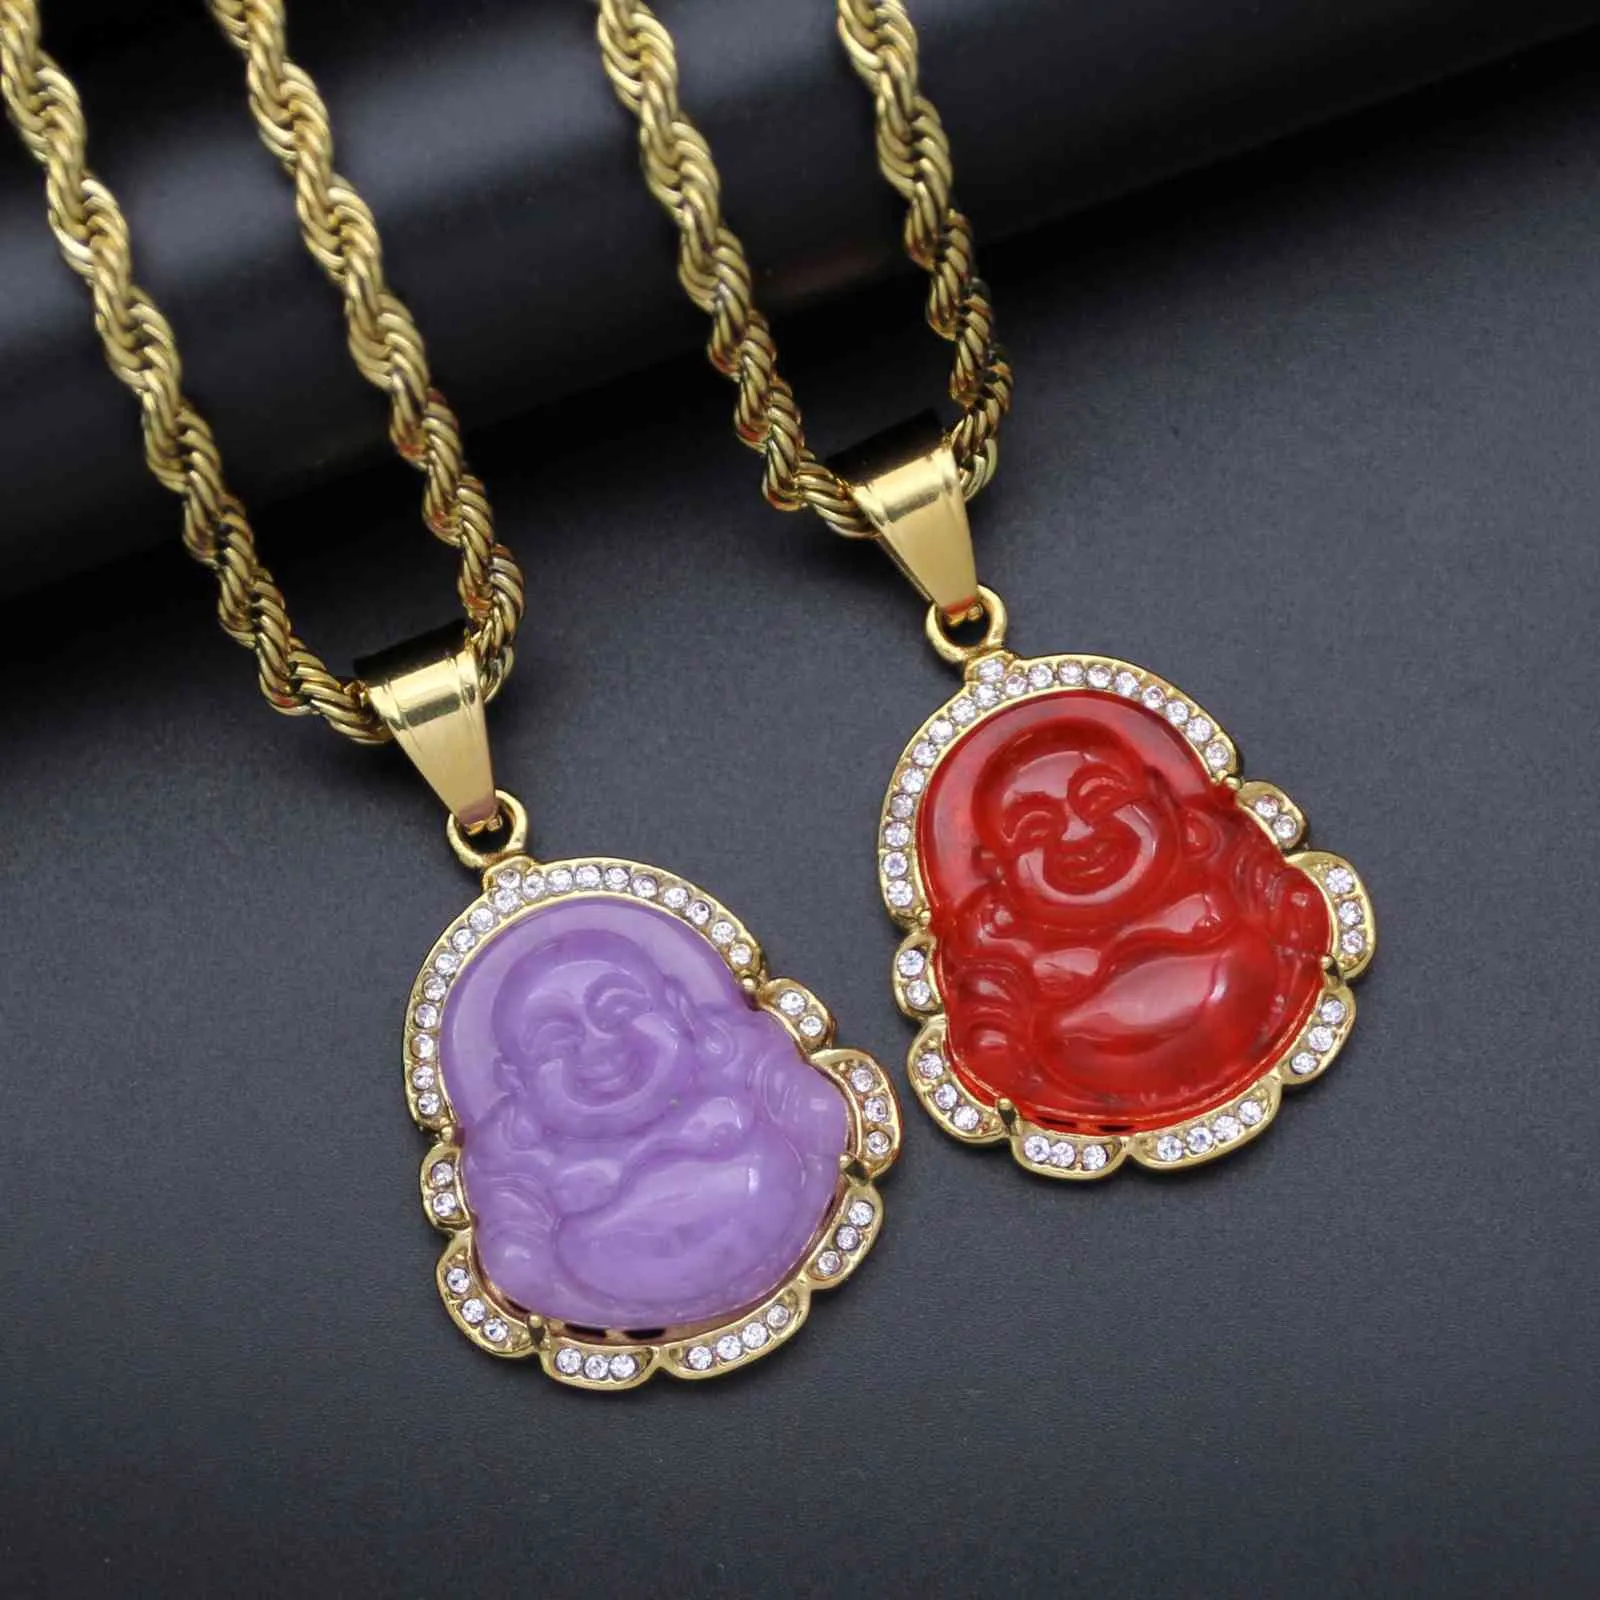 Green Jade Jewelry Laughing Buddha Pendant Chain Necklace For Women Stainless Steel 18k Gold Plated Amulet Accessories Mothers Day237a